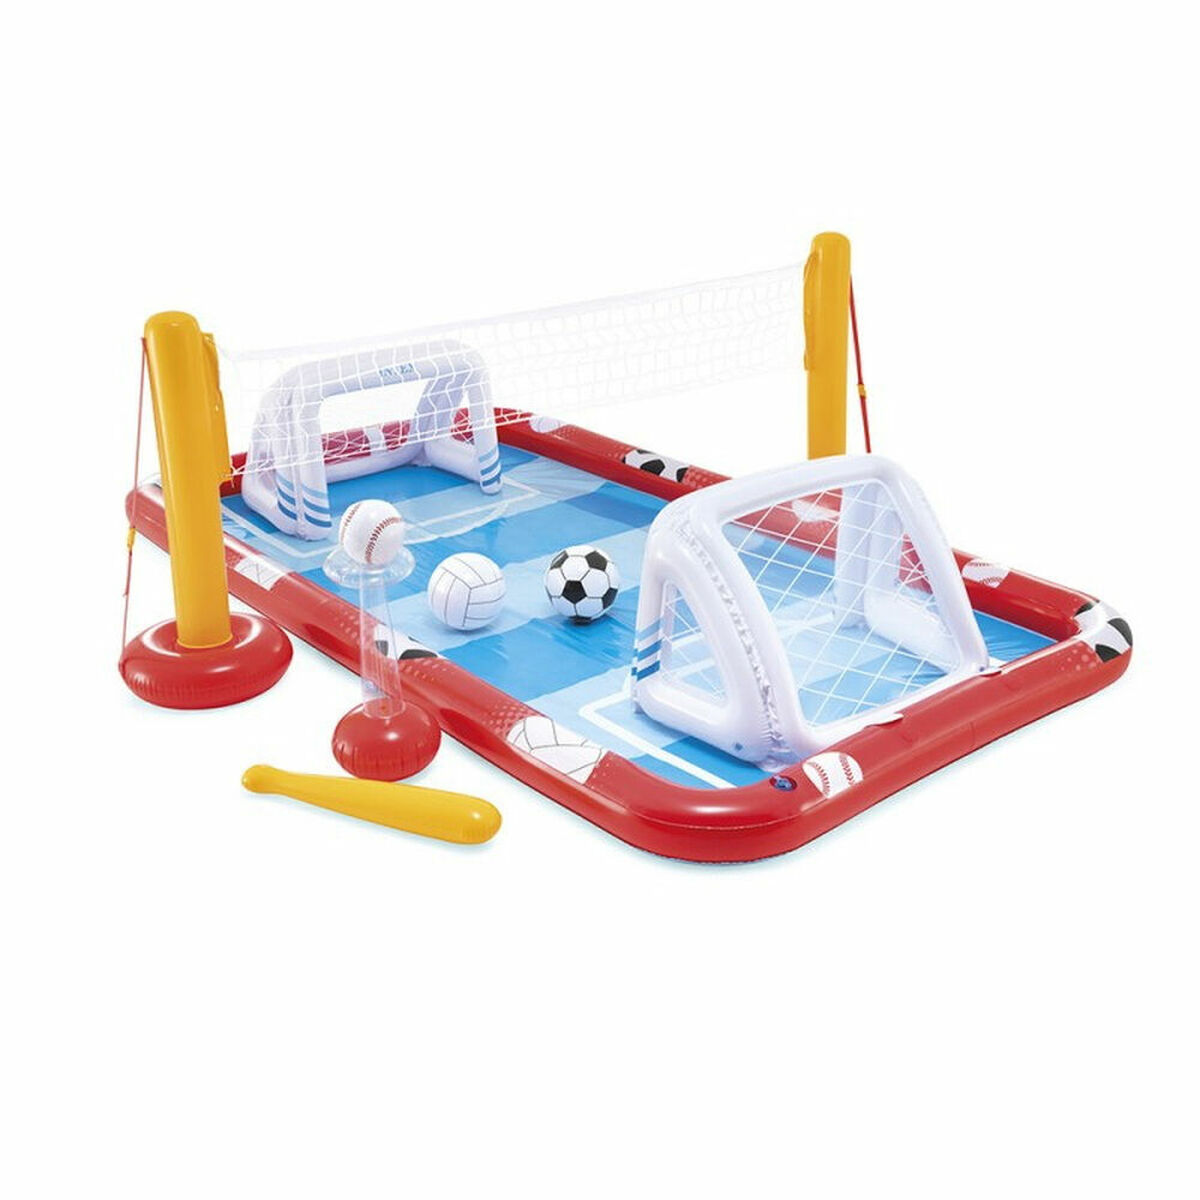 Inflatable Paddling Pool for Children Intex Sports Games 470 l (325 x 267 x 102 cm)